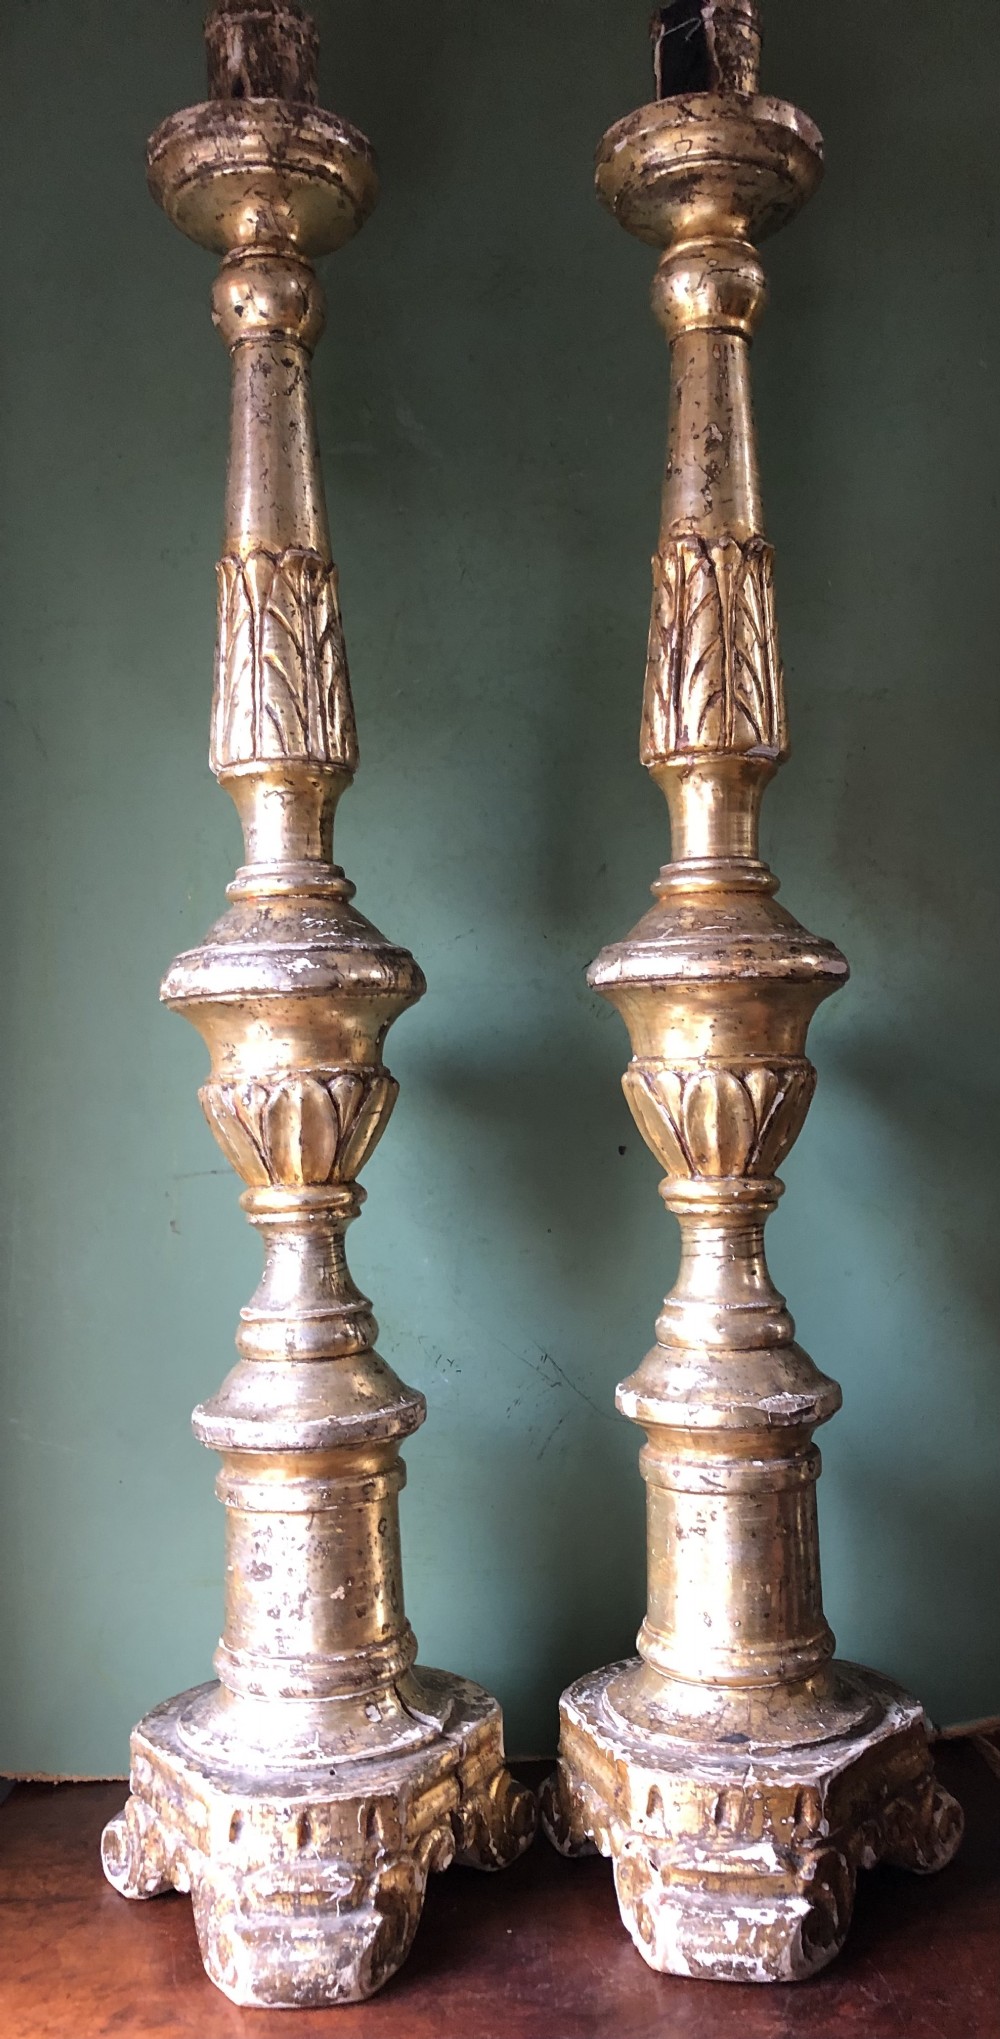 pair of tall late c18th early c19th italian venetianstyle giltwood and silvered mecca altartype candlesticks